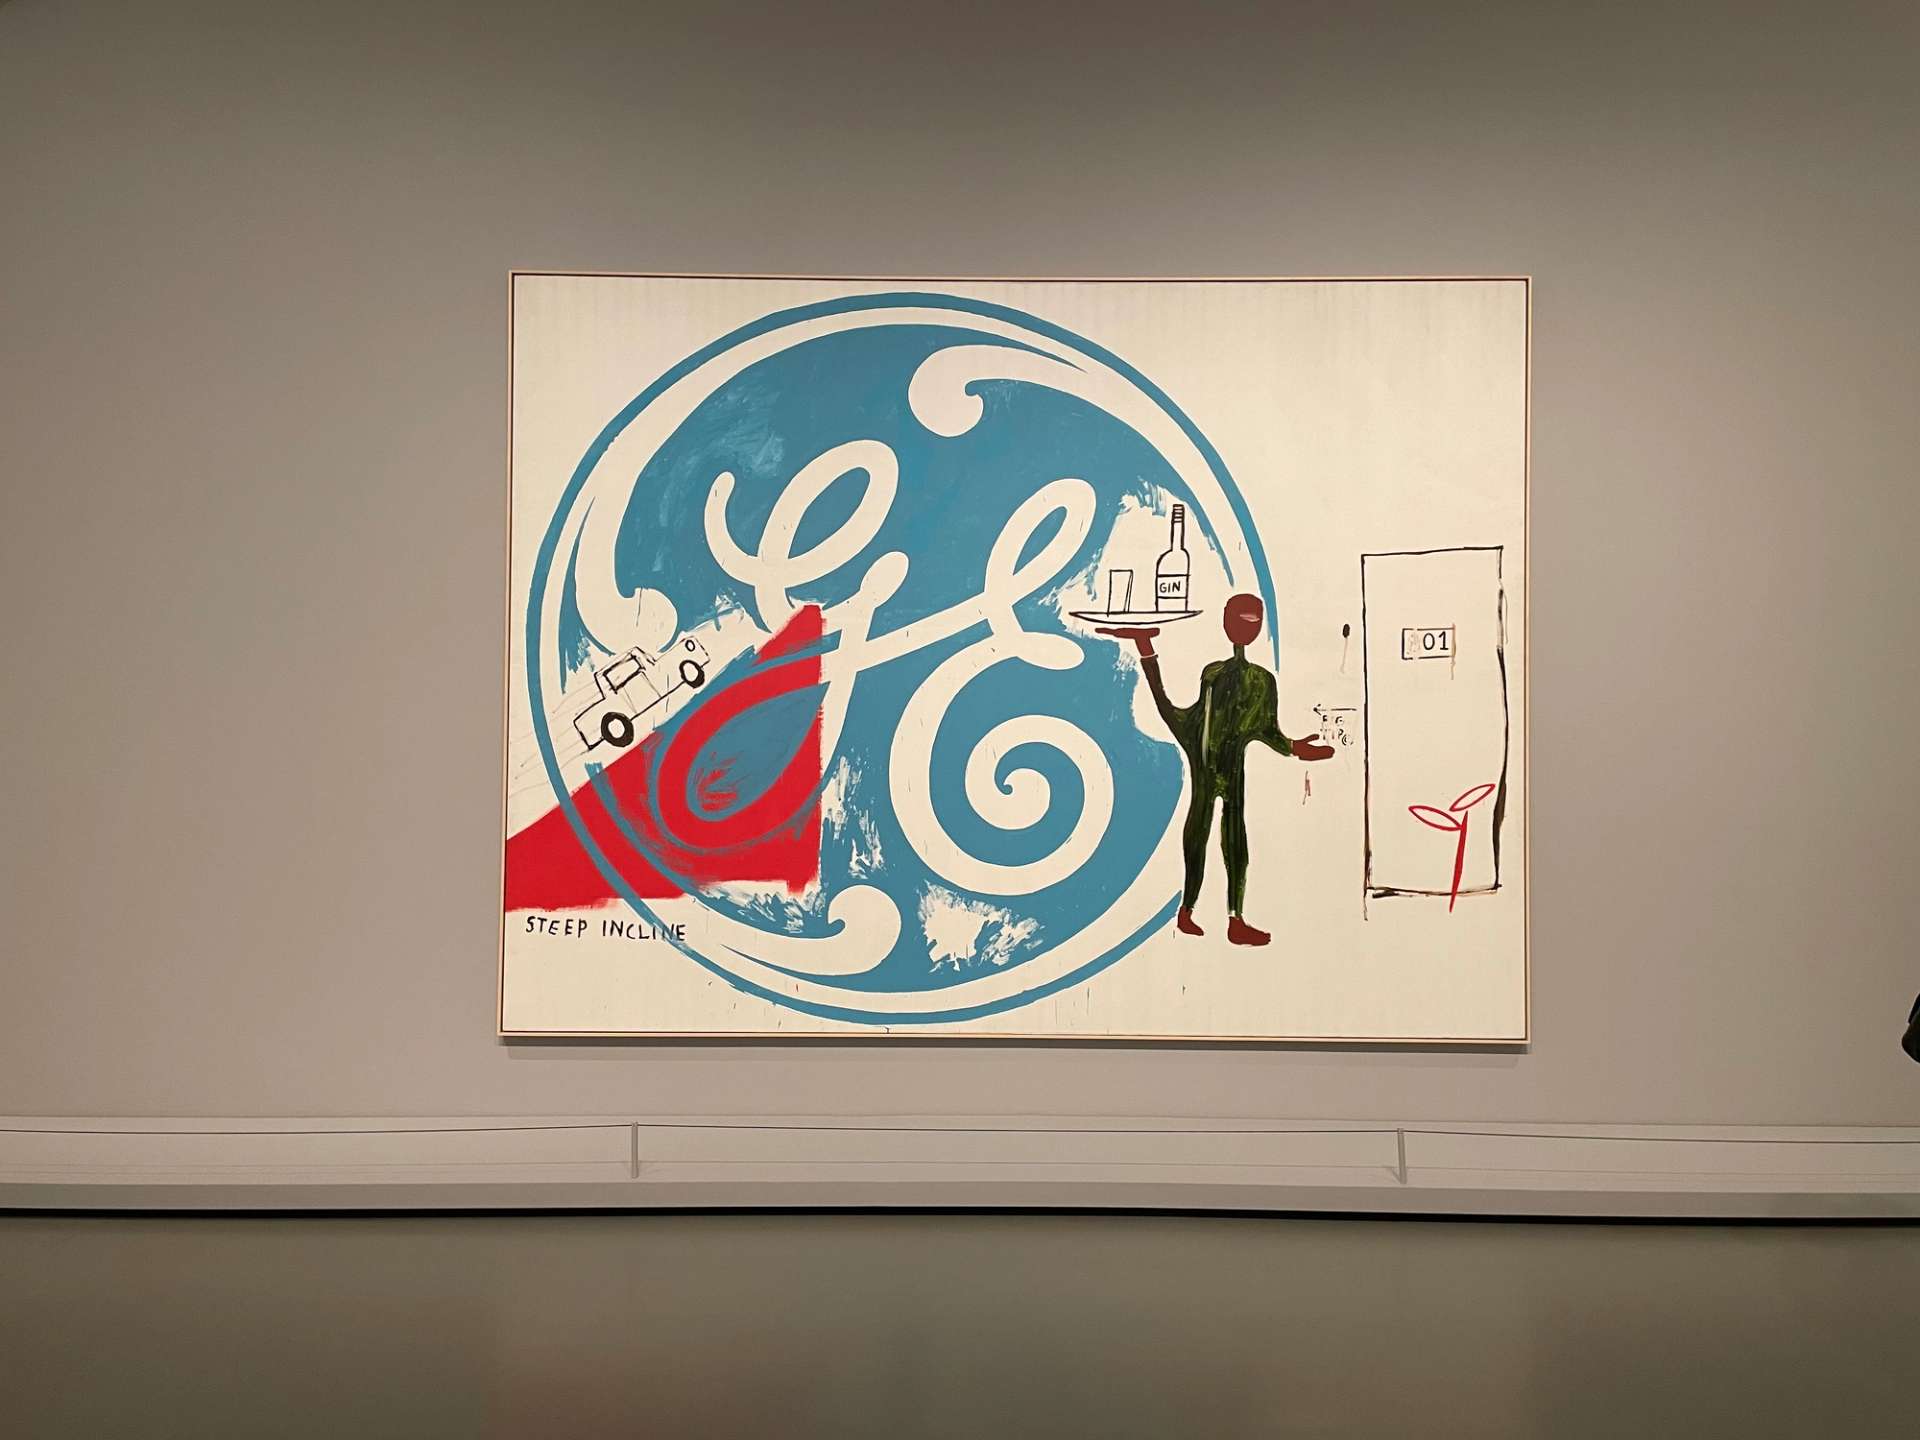 Installation view of Painting Four Hands. A large blue General Electric logo artwork